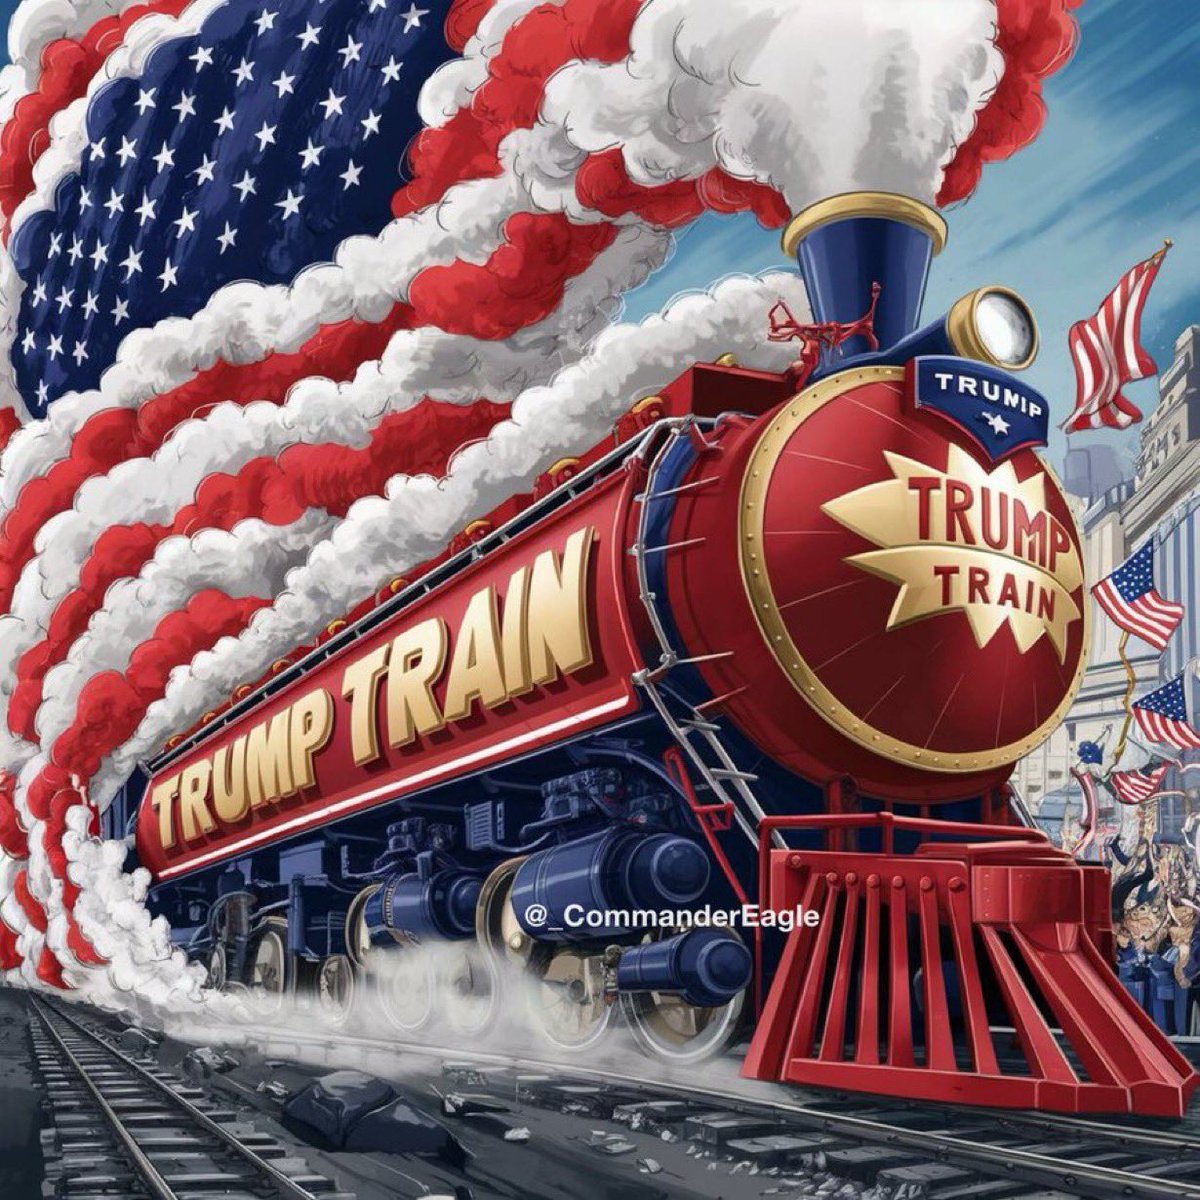 🔥GOOD MORNING TO EVERYONE !!!⚡️ 🤜🏻💥🤛🏻💯 

🔥TO GAIN NEW FOLLOWERS➡️FOLLOW ME 
@GOP_IS_GUTLESS 🇺🇸 🔥 👊 
 AND RETWEET! 🇺🇸 

🔥I FOLLOW BACK!!!! 💯 CHECK IT OUT!! 🇺🇸

🔥👊TURN ON NOTIFICATIONS 🇺🇸

🔥DROP AN EMOJI & FOLLOW EVERYONE WHO LIKES IT!!! 🇺🇸

🔥REPLY WITH IFB & RETWEET TO